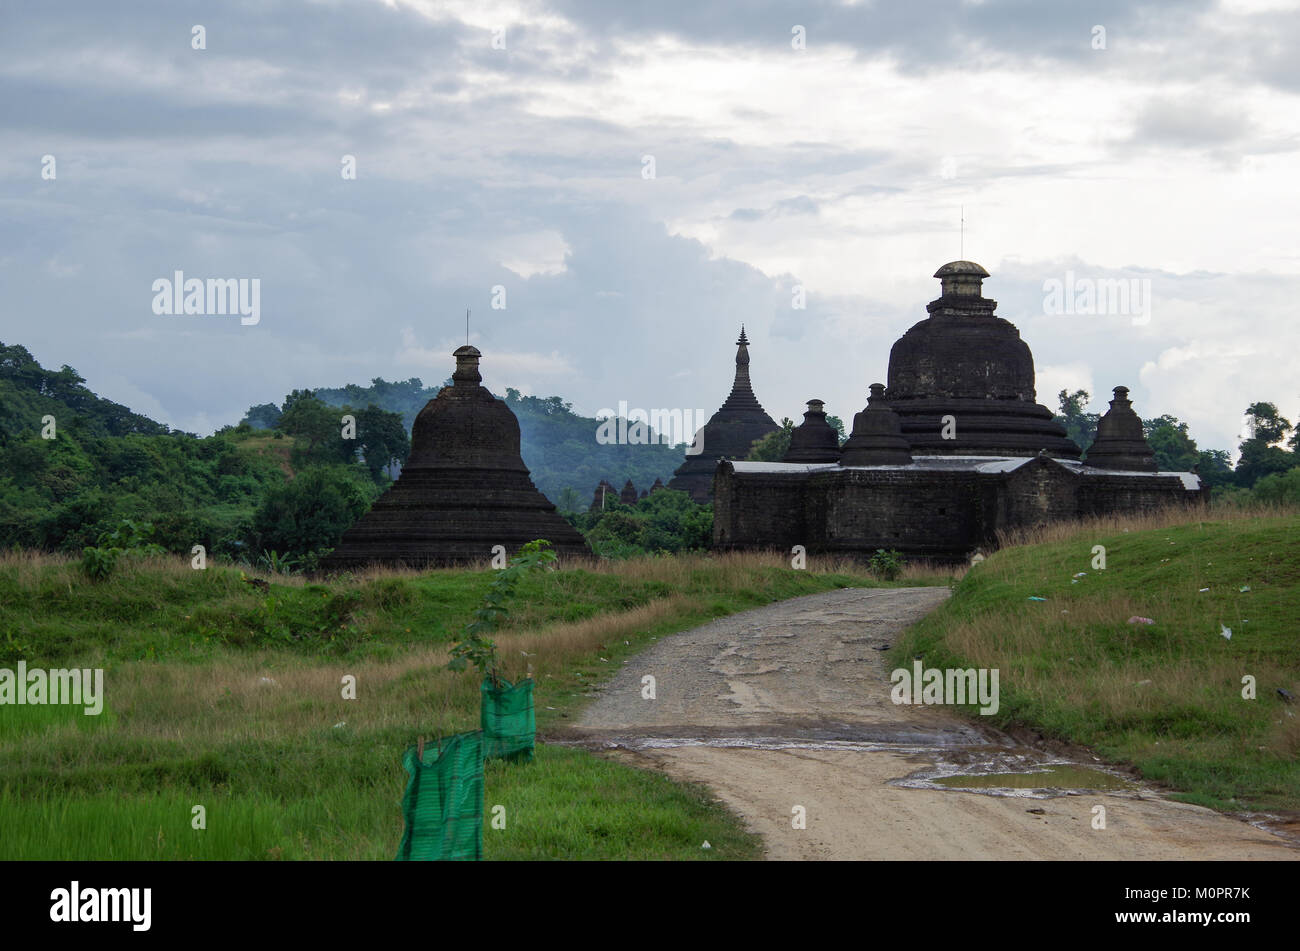 The ancient sites of Mrauk U, Rakhine State, Myanmar and a village road on a cloudy day in green landscape Stock Photo